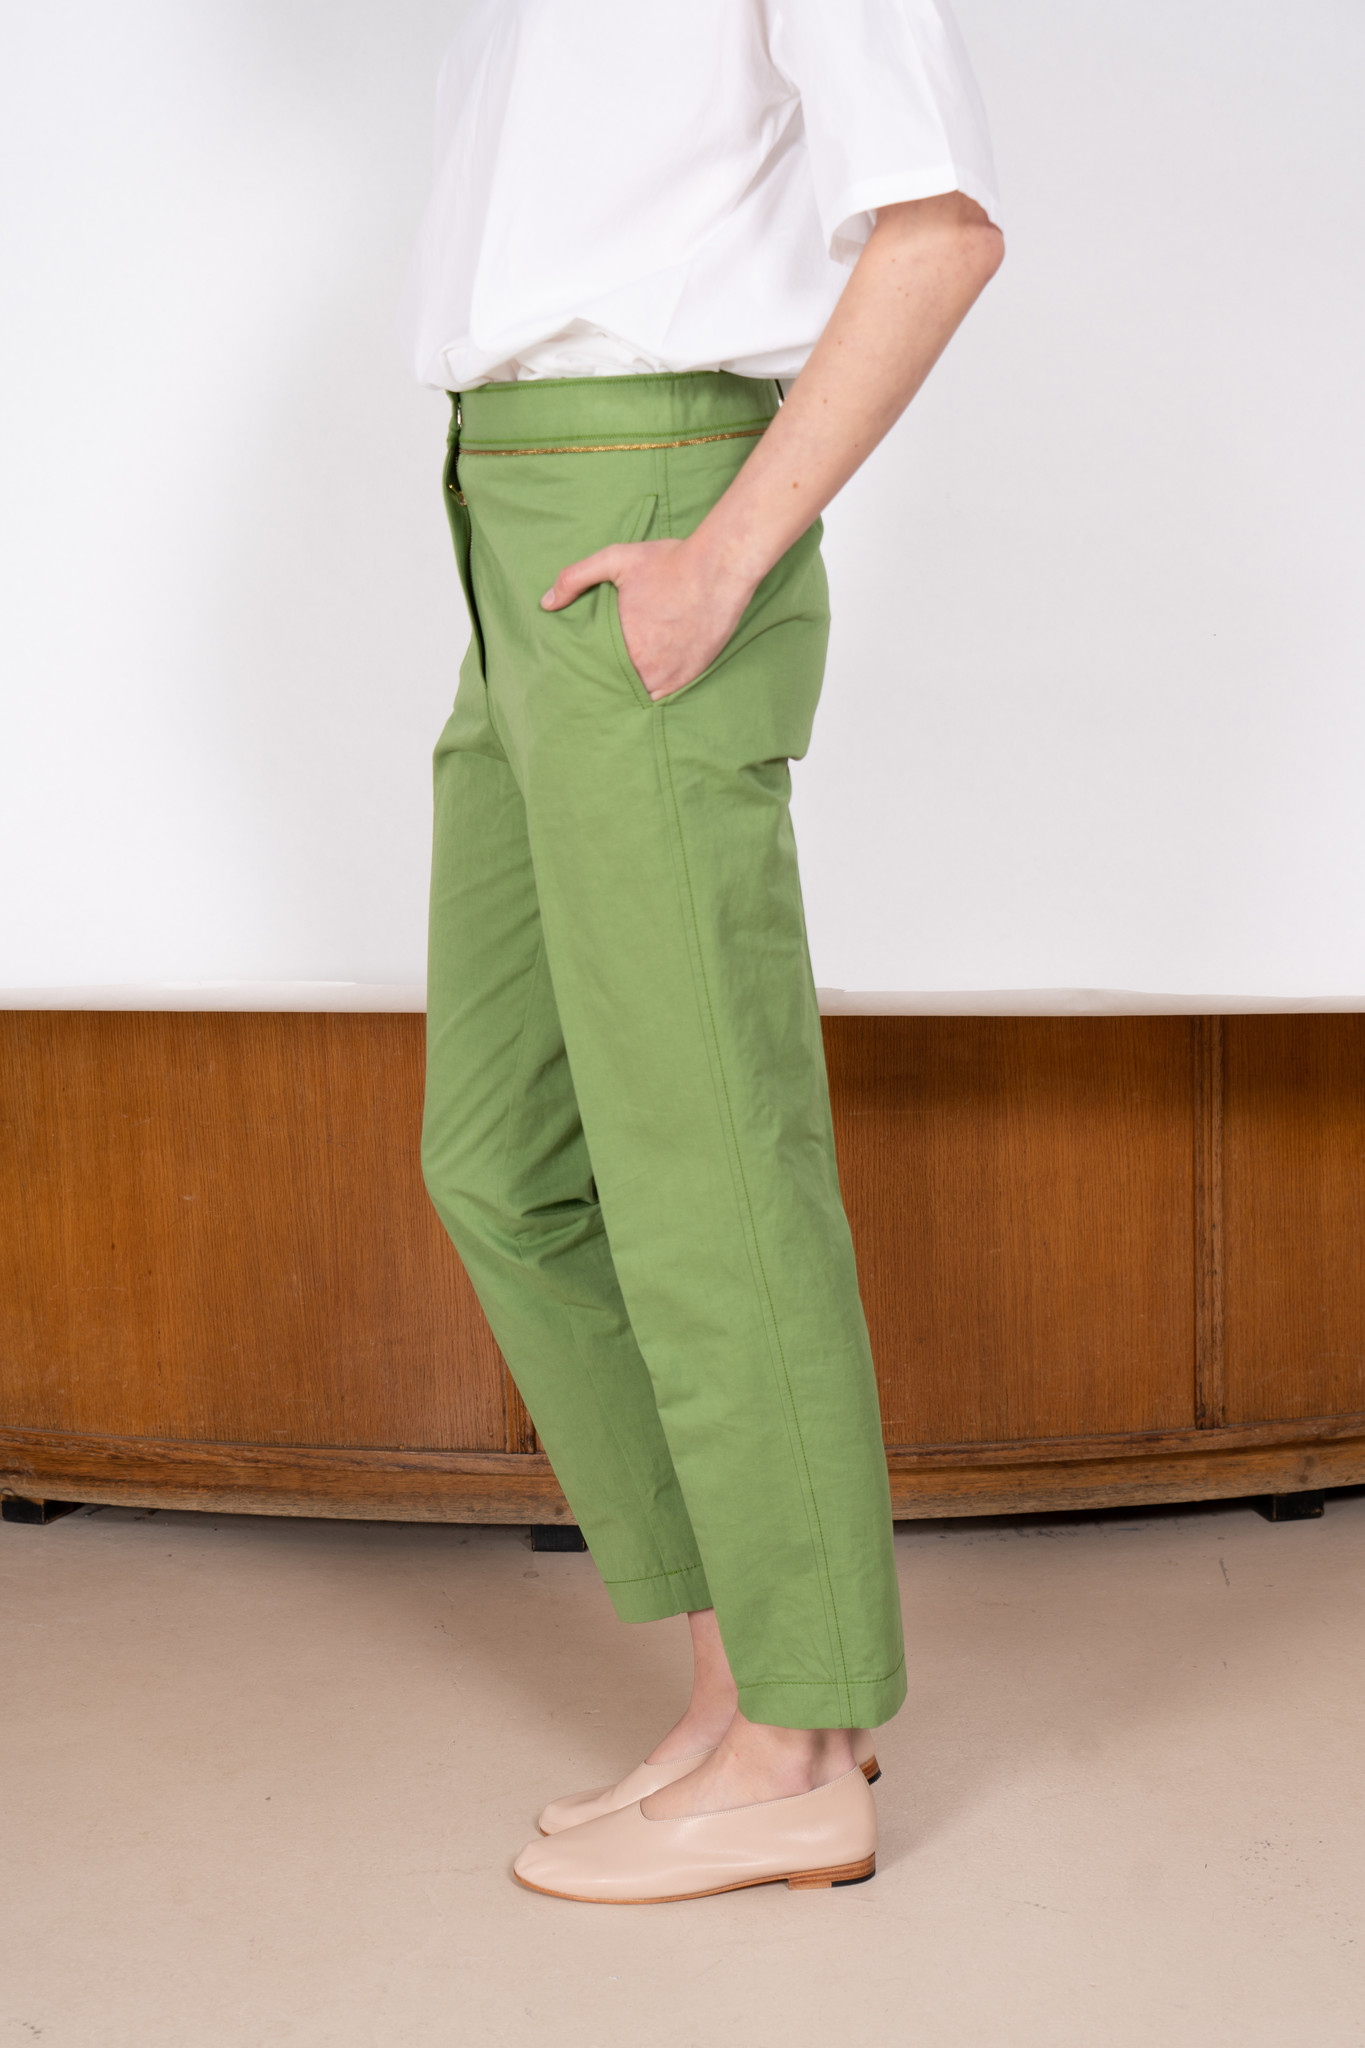 Available In Multicolour Designer Cigarette Pants at Best Price in Surat |  One Shoppee Incorporation